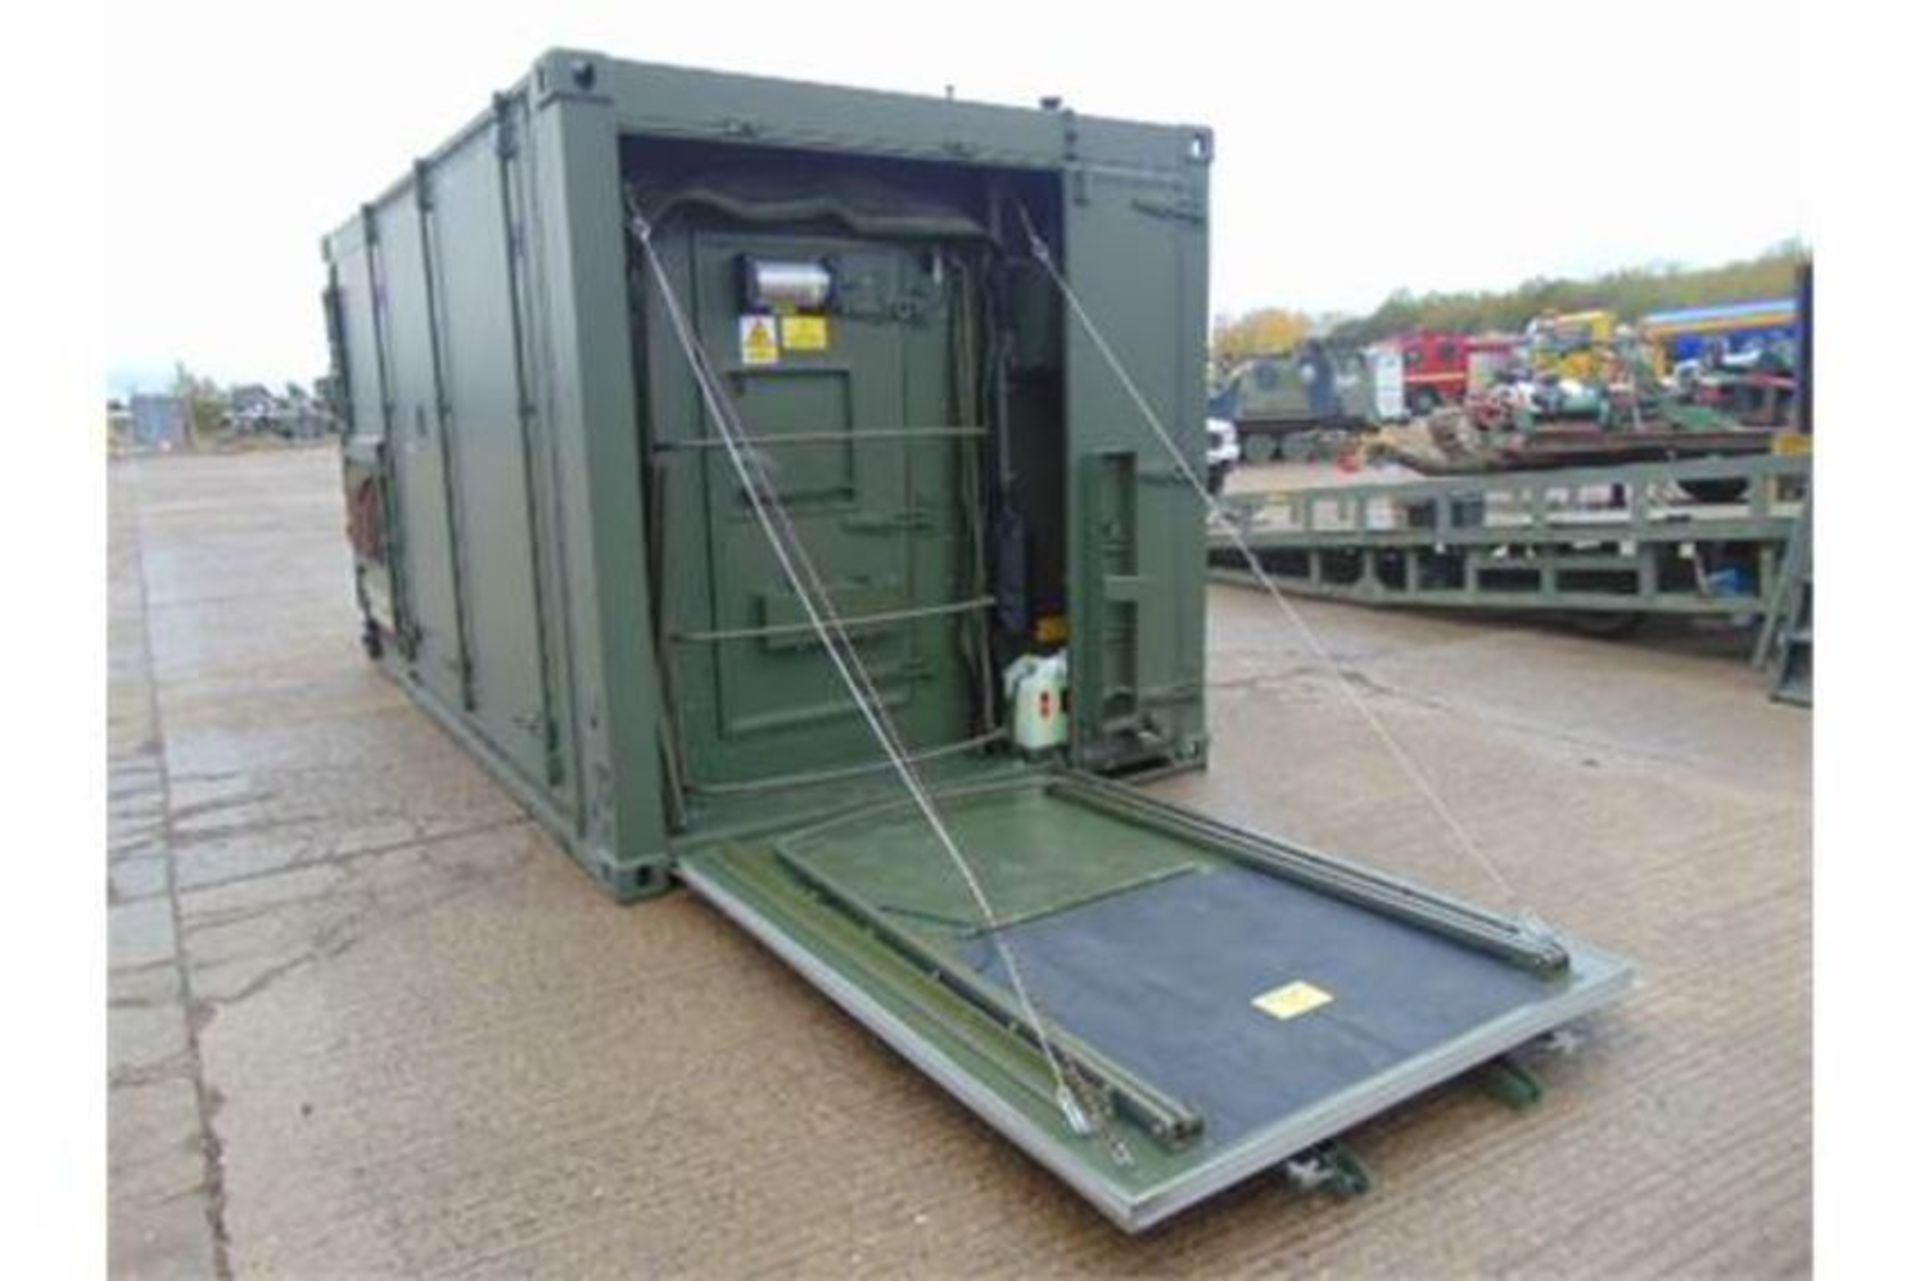 Rapidly Deployable Containerised Insys Ltd Integrated Biological Detection/Decontamination System - Image 27 of 33